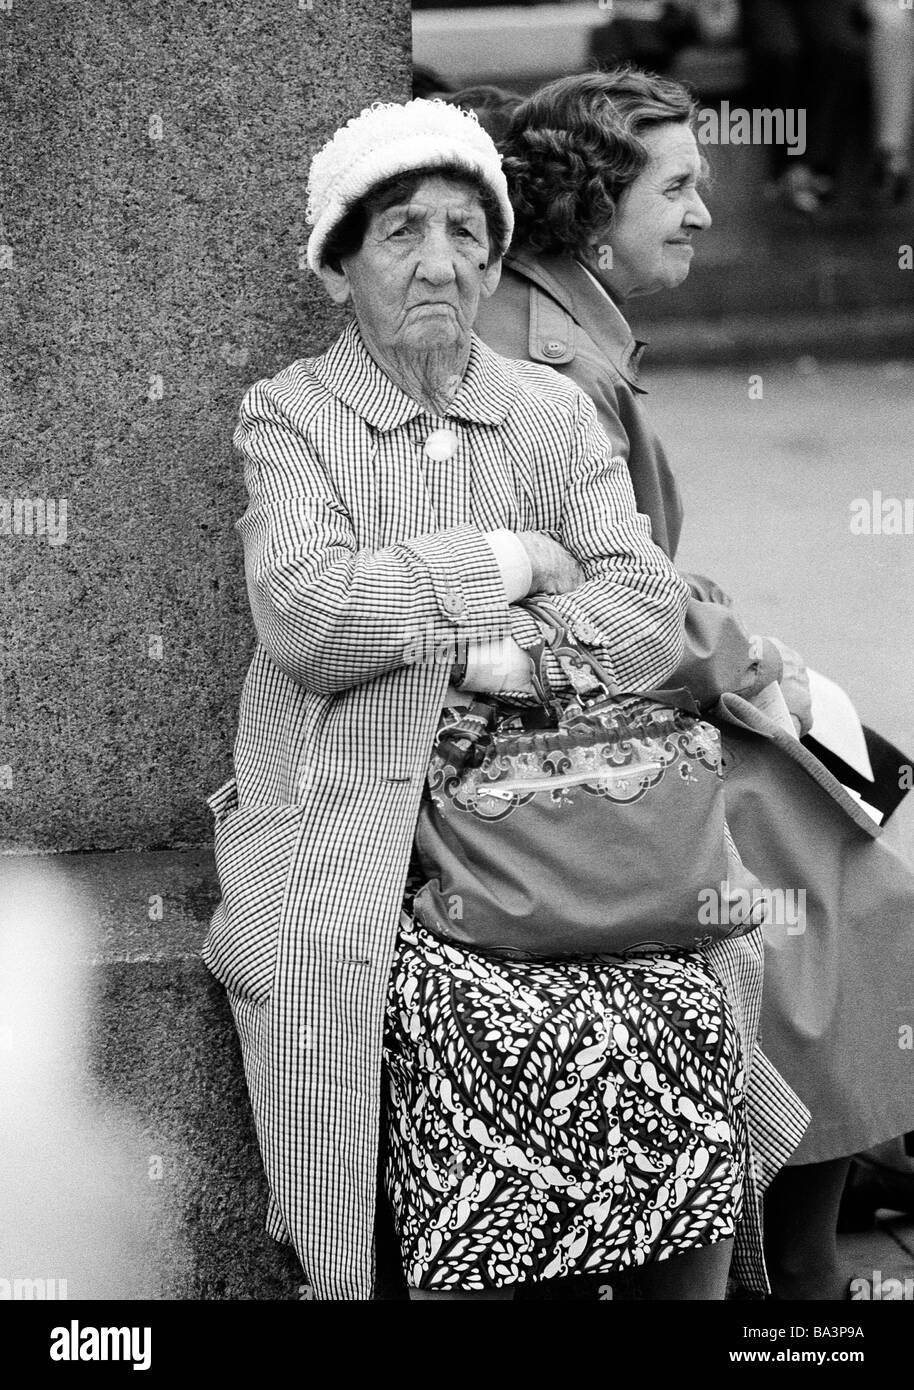 Great older women Black and White Stock Photos & Images - Alamy